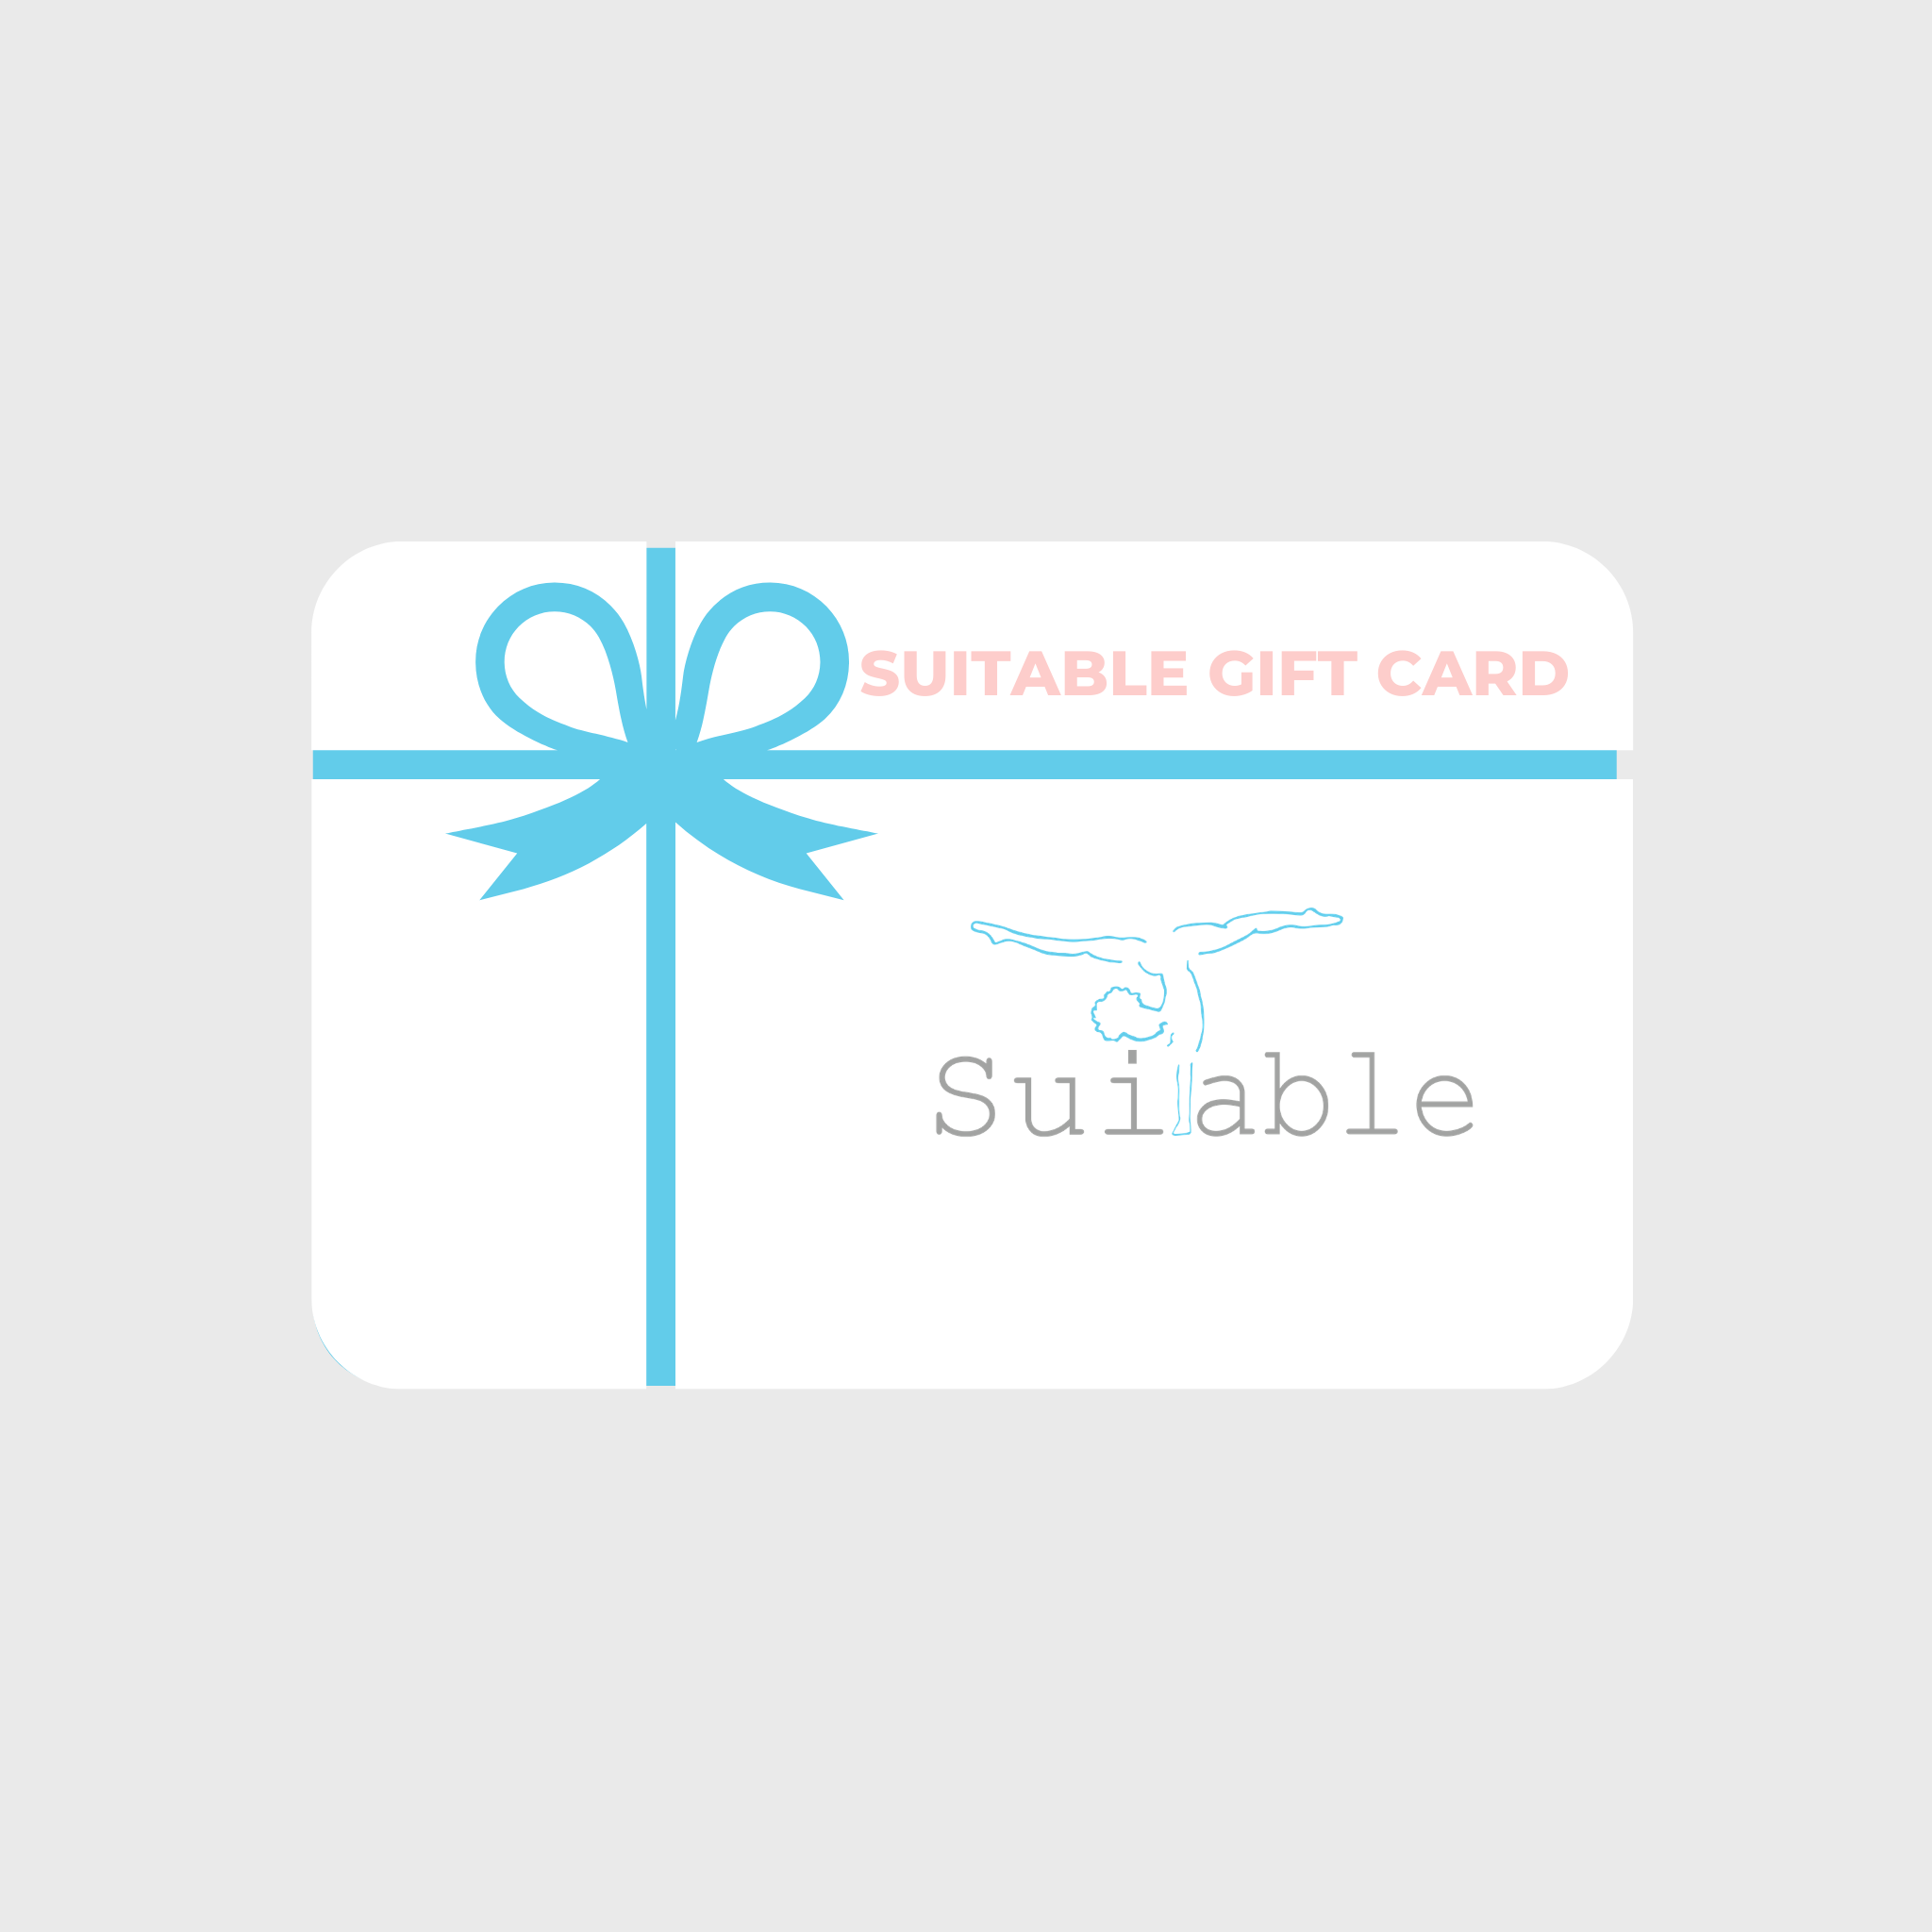 Suitable Gift Cards